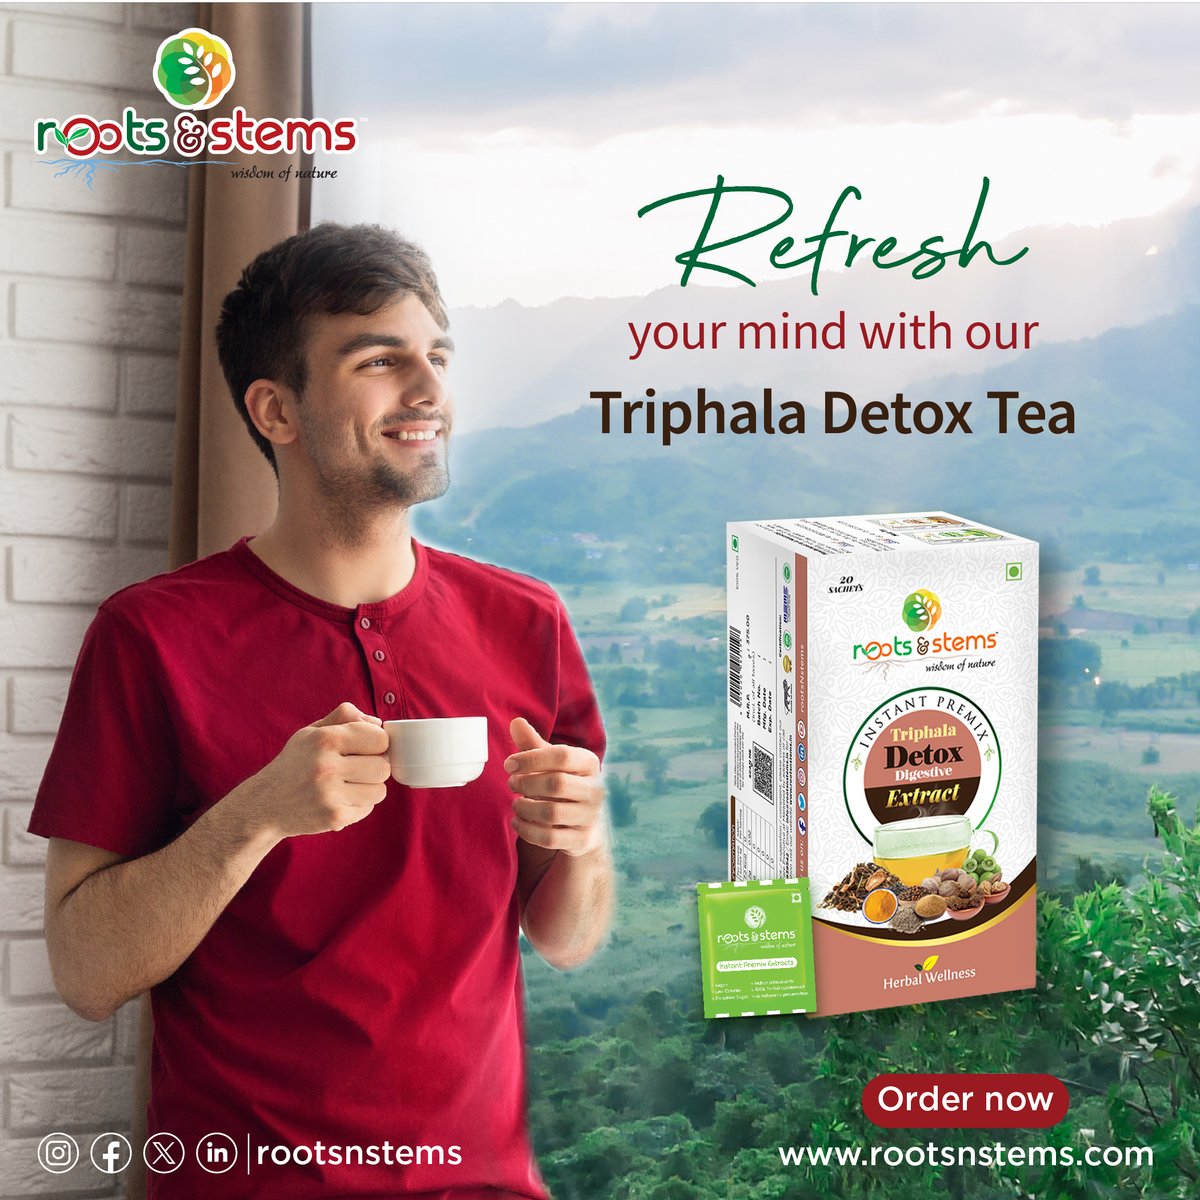 Triphala detox tea is a popular herbal remedy in traditional Ayurvedic medicine. It is made from a blend of three dried fruits: Amalaki (Indian gooseberry), Bibhitaki (Terminalia bellirica), and Haritaki (Terminalia chebula). 

#TriphalaDetox
#InstantMix 
#rootsnstems